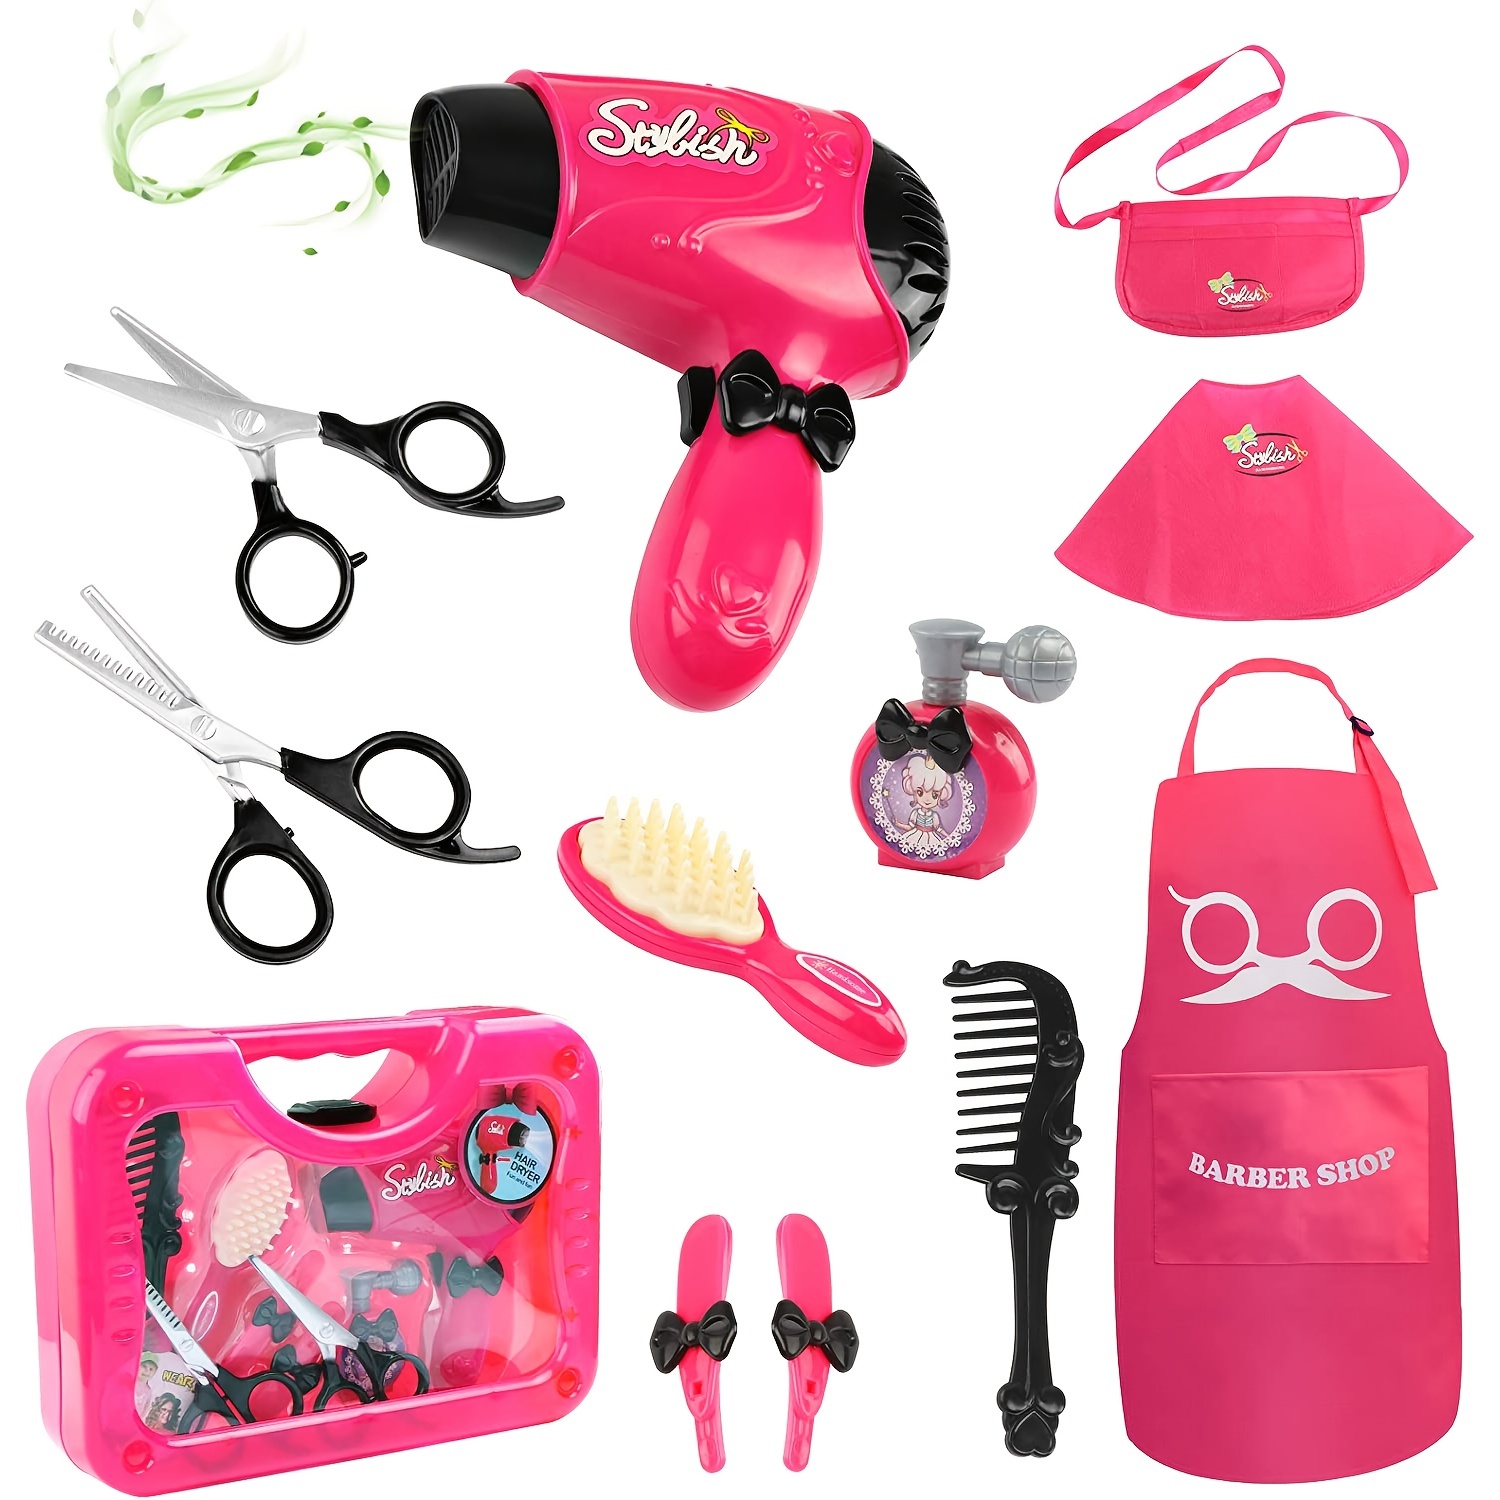 Toddler Girls Beauty Hair Salon Toy Kit, Pretend Makeup Toy Kit with Carrying Case, Hairdryer, Mirror & Other Accessories for Kids, 17 Piece Set, Pink